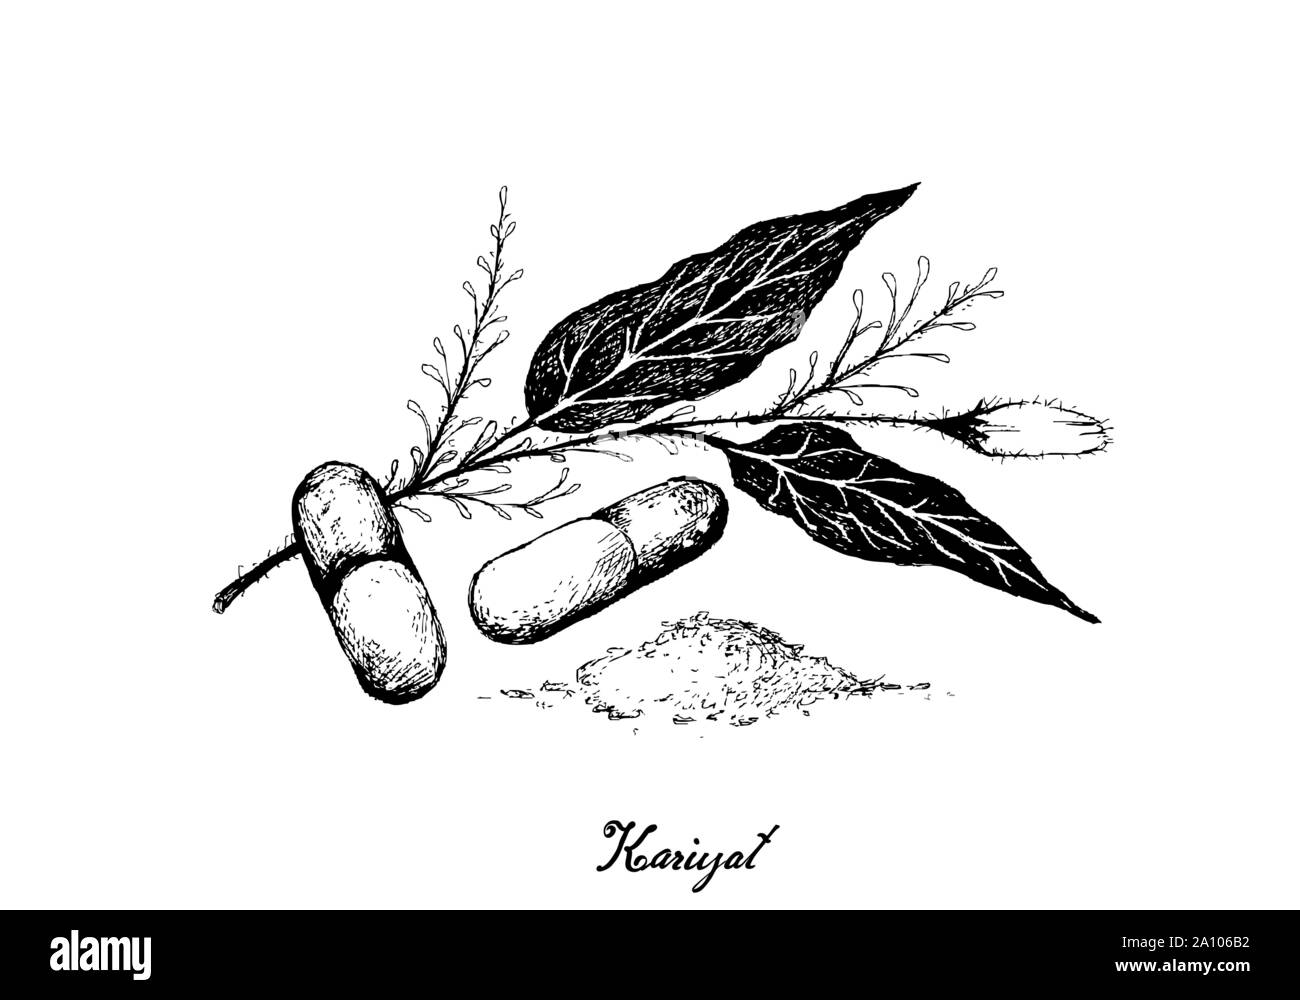 Vegetable and Herb, Hand Drawn Illustration of Kariyat or Andrographis Paniculata Plants with Pill. Ayurveda Herbal Medicine Used to Treat Infections Stock Vector